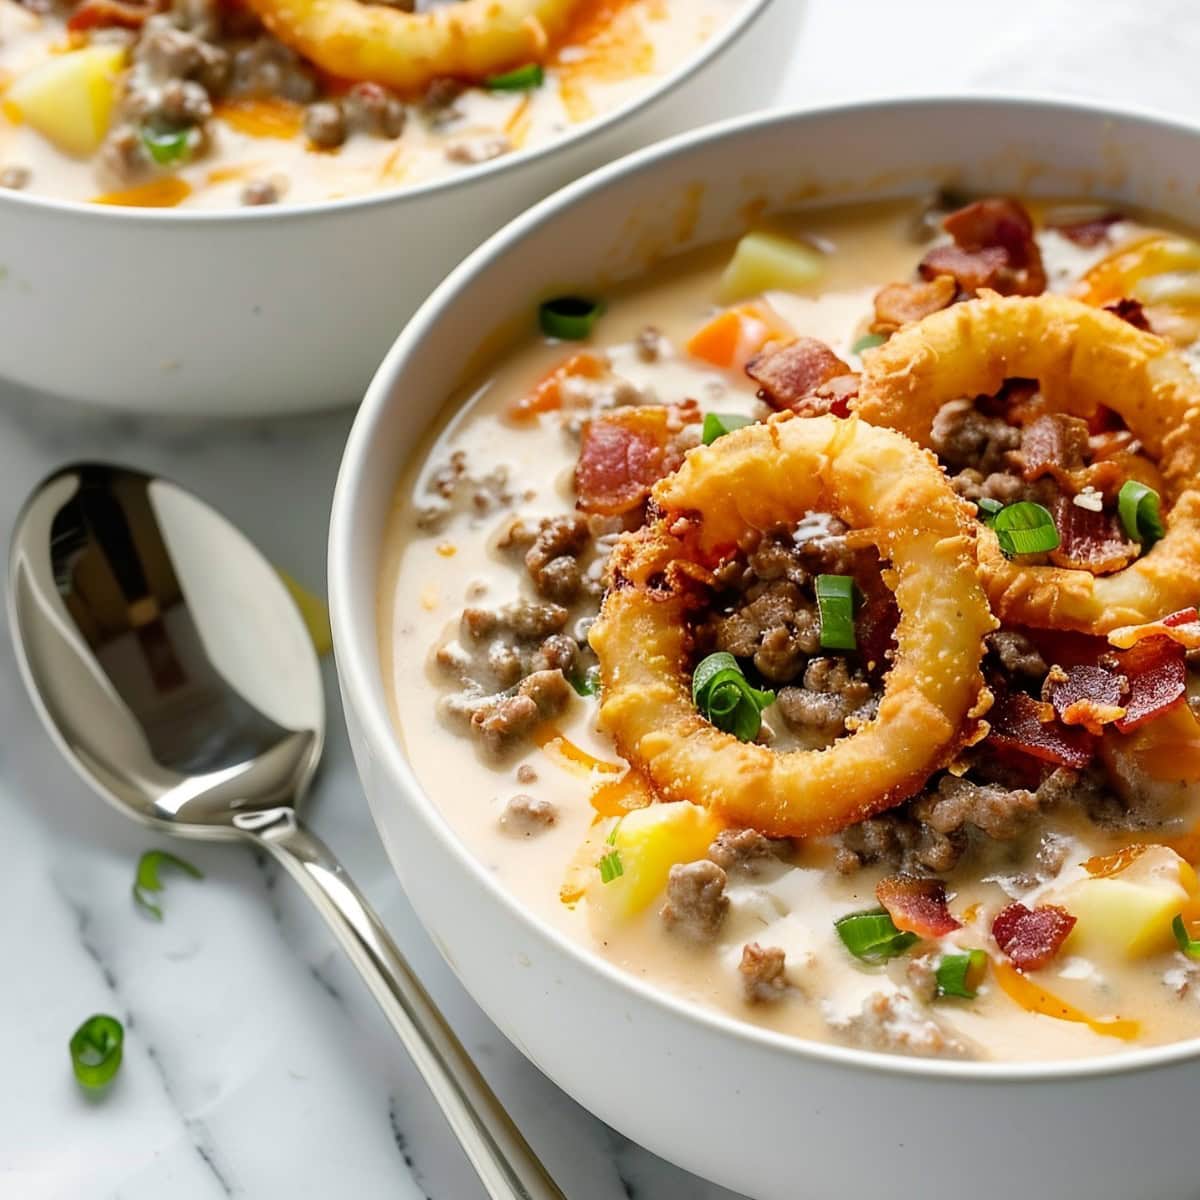 Two Bowls of Cheeseburger Soup, Topped with Onion Rings